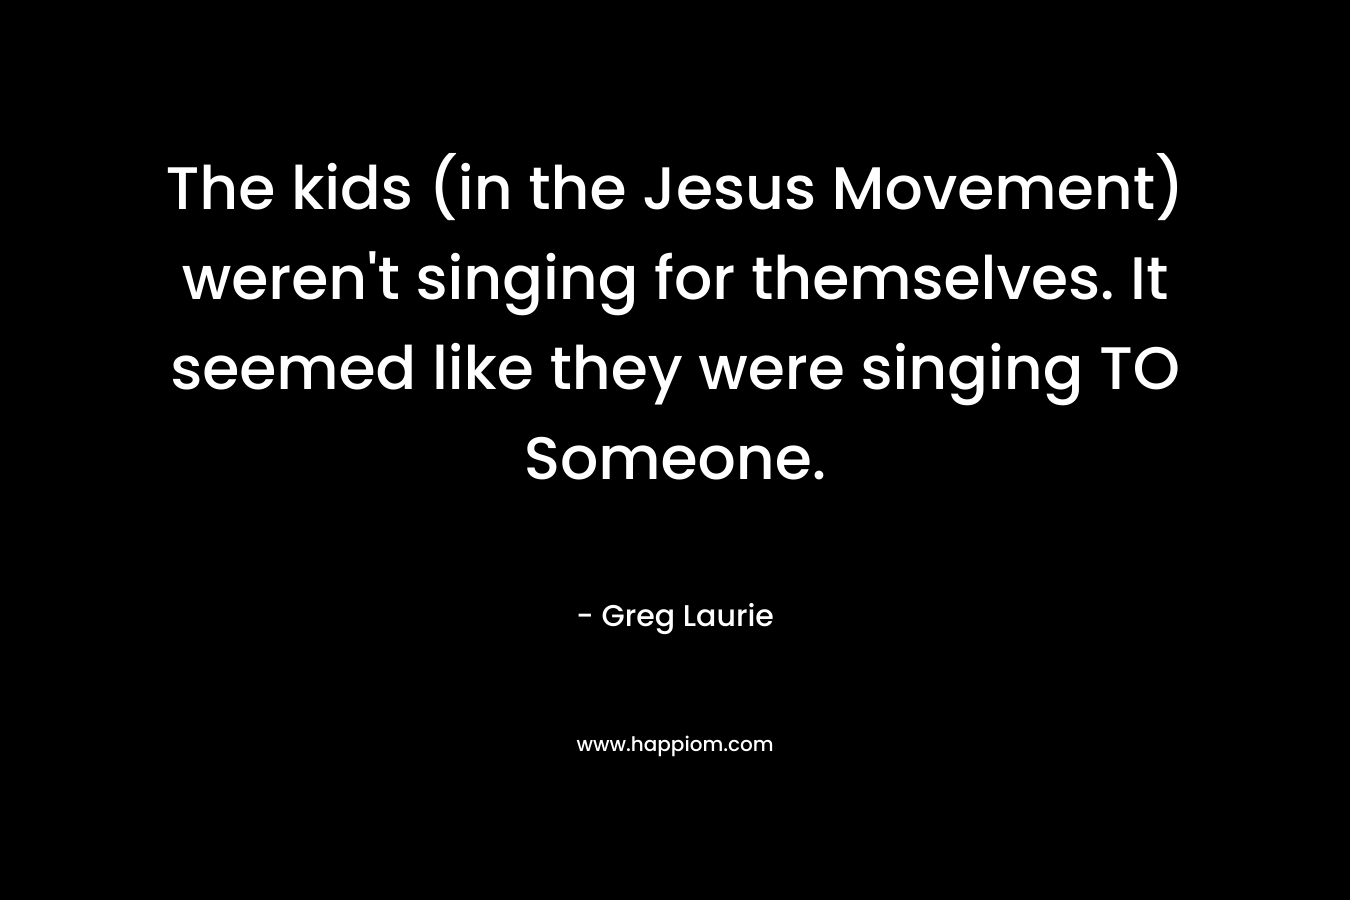 The kids (in the Jesus Movement) weren't singing for themselves. It seemed like they were singing TO Someone.